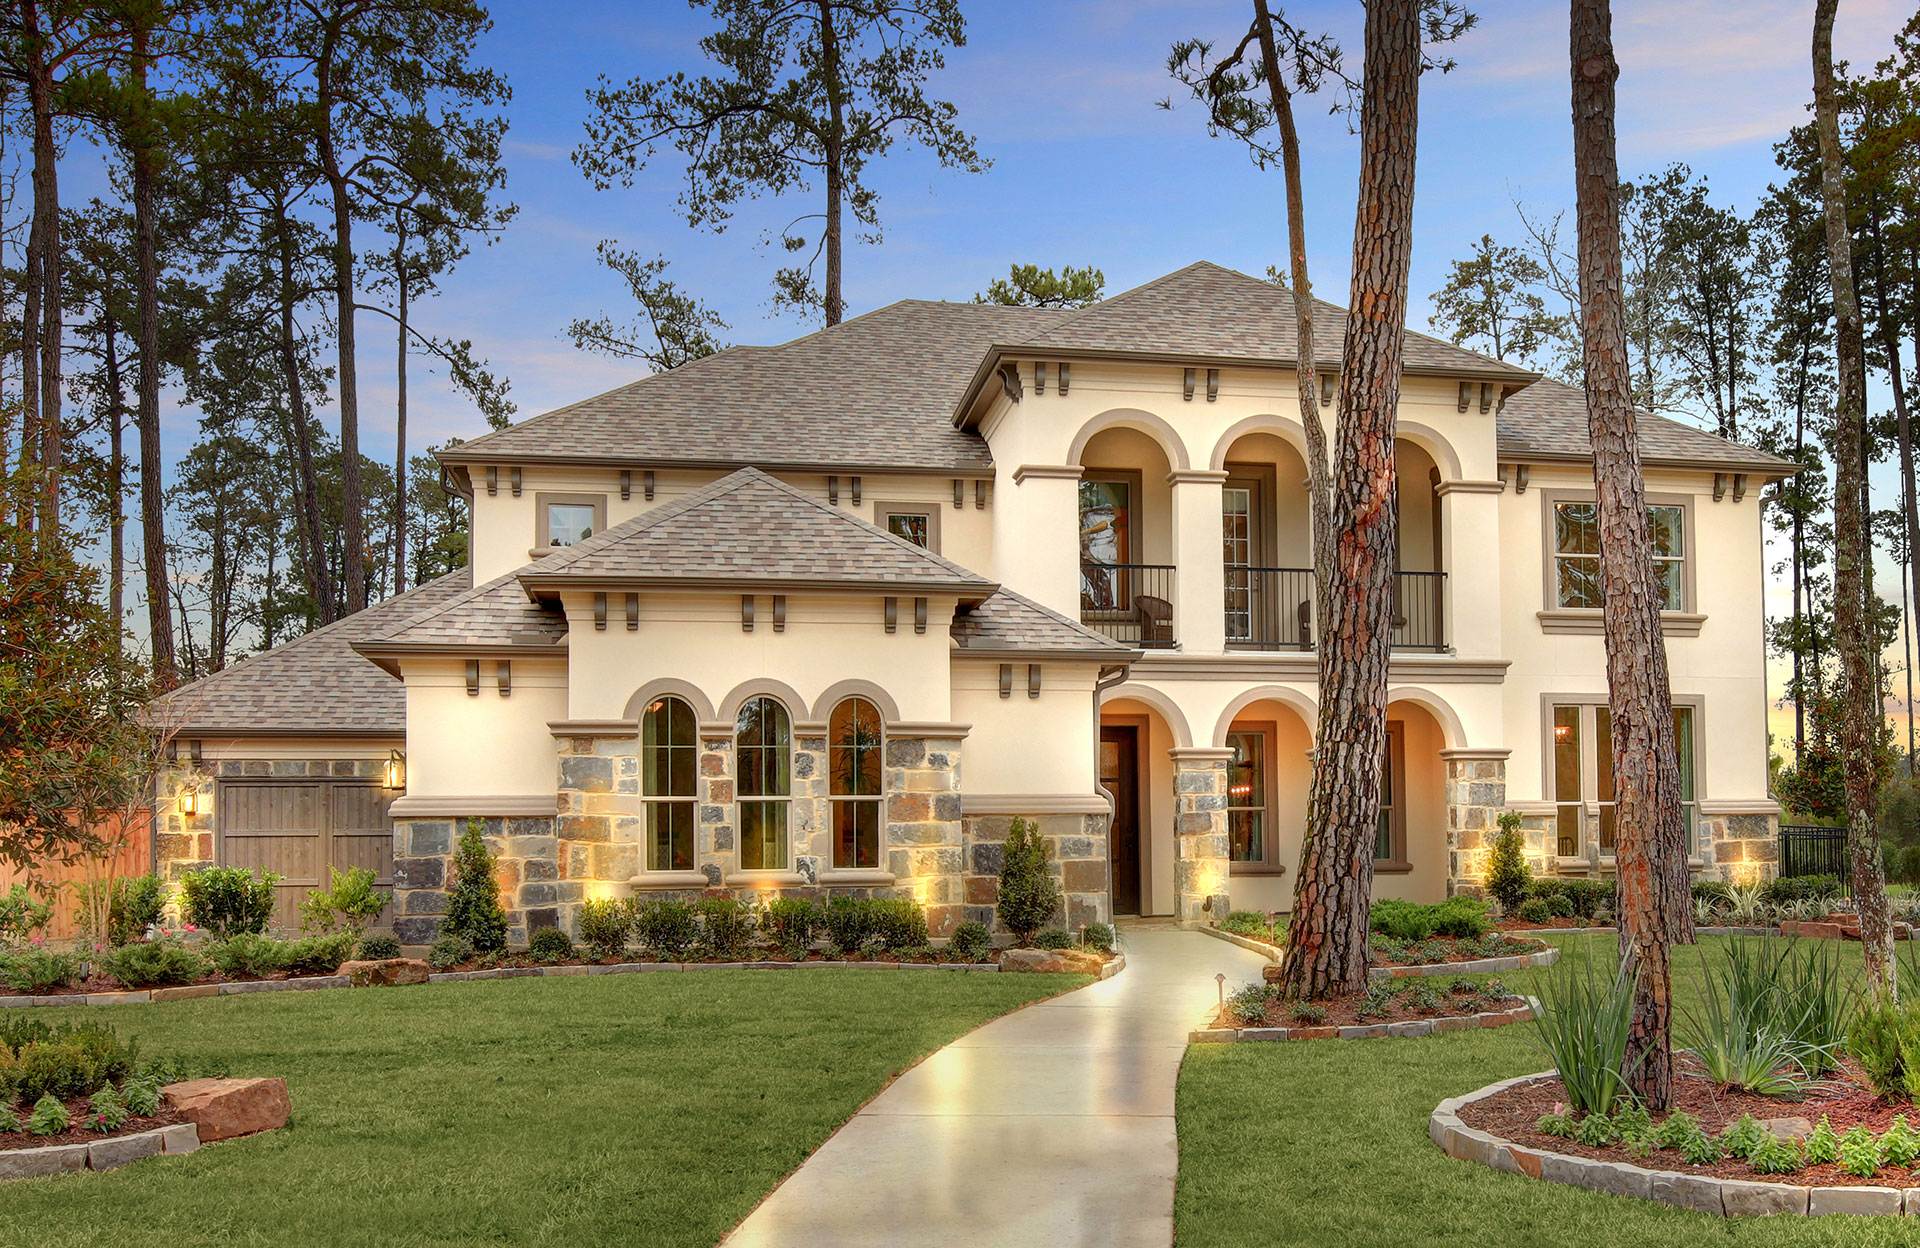 Drees Custom Homes expands in Houston area - Houston Chronicle